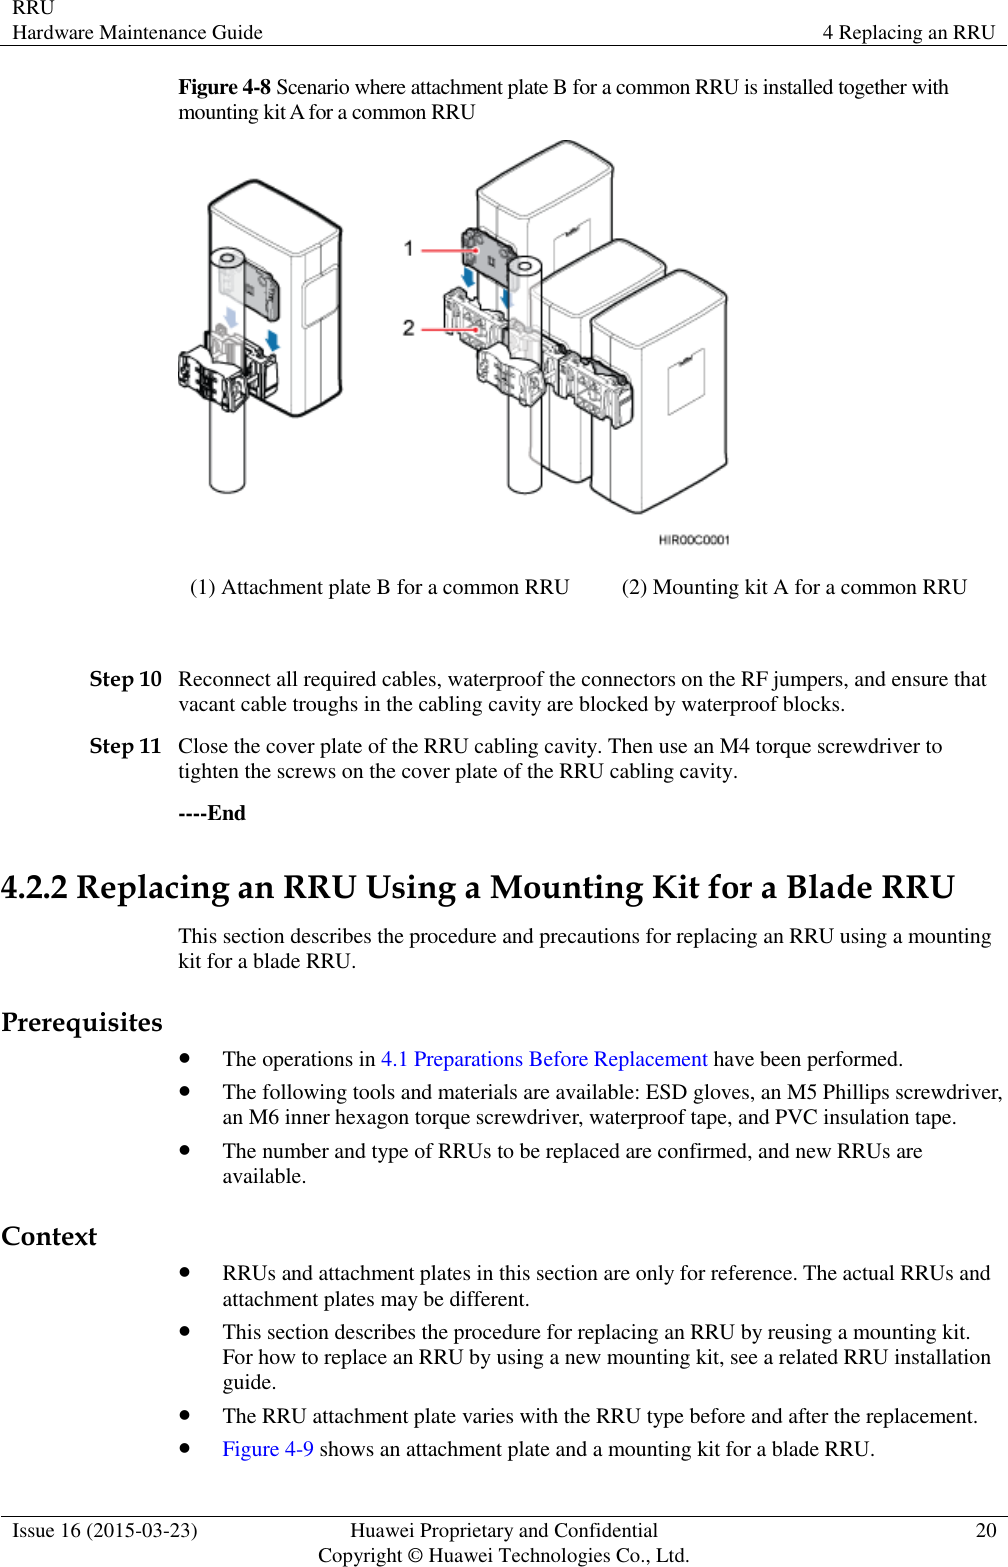 RRU Hardware Maintenance Guide 4 Replacing an RRU  Issue 16 (2015-03-23) Huawei Proprietary and Confidential                                     Copyright © Huawei Technologies Co., Ltd. 20  Figure 4-8 Scenario where attachment plate B for a common RRU is installed together with mounting kit A for a common RRU  (1) Attachment plate B for a common RRU (2) Mounting kit A for a common RRU  Step 10 Reconnect all required cables, waterproof the connectors on the RF jumpers, and ensure that vacant cable troughs in the cabling cavity are blocked by waterproof blocks. Step 11 Close the cover plate of the RRU cabling cavity. Then use an M4 torque screwdriver to tighten the screws on the cover plate of the RRU cabling cavity. ----End 4.2.2 Replacing an RRU Using a Mounting Kit for a Blade RRU This section describes the procedure and precautions for replacing an RRU using a mounting kit for a blade RRU. Prerequisites  The operations in 4.1 Preparations Before Replacement have been performed.  The following tools and materials are available: ESD gloves, an M5 Phillips screwdriver, an M6 inner hexagon torque screwdriver, waterproof tape, and PVC insulation tape.  The number and type of RRUs to be replaced are confirmed, and new RRUs are available. Context  RRUs and attachment plates in this section are only for reference. The actual RRUs and attachment plates may be different.  This section describes the procedure for replacing an RRU by reusing a mounting kit. For how to replace an RRU by using a new mounting kit, see a related RRU installation guide.  The RRU attachment plate varies with the RRU type before and after the replacement.  Figure 4-9 shows an attachment plate and a mounting kit for a blade RRU. 